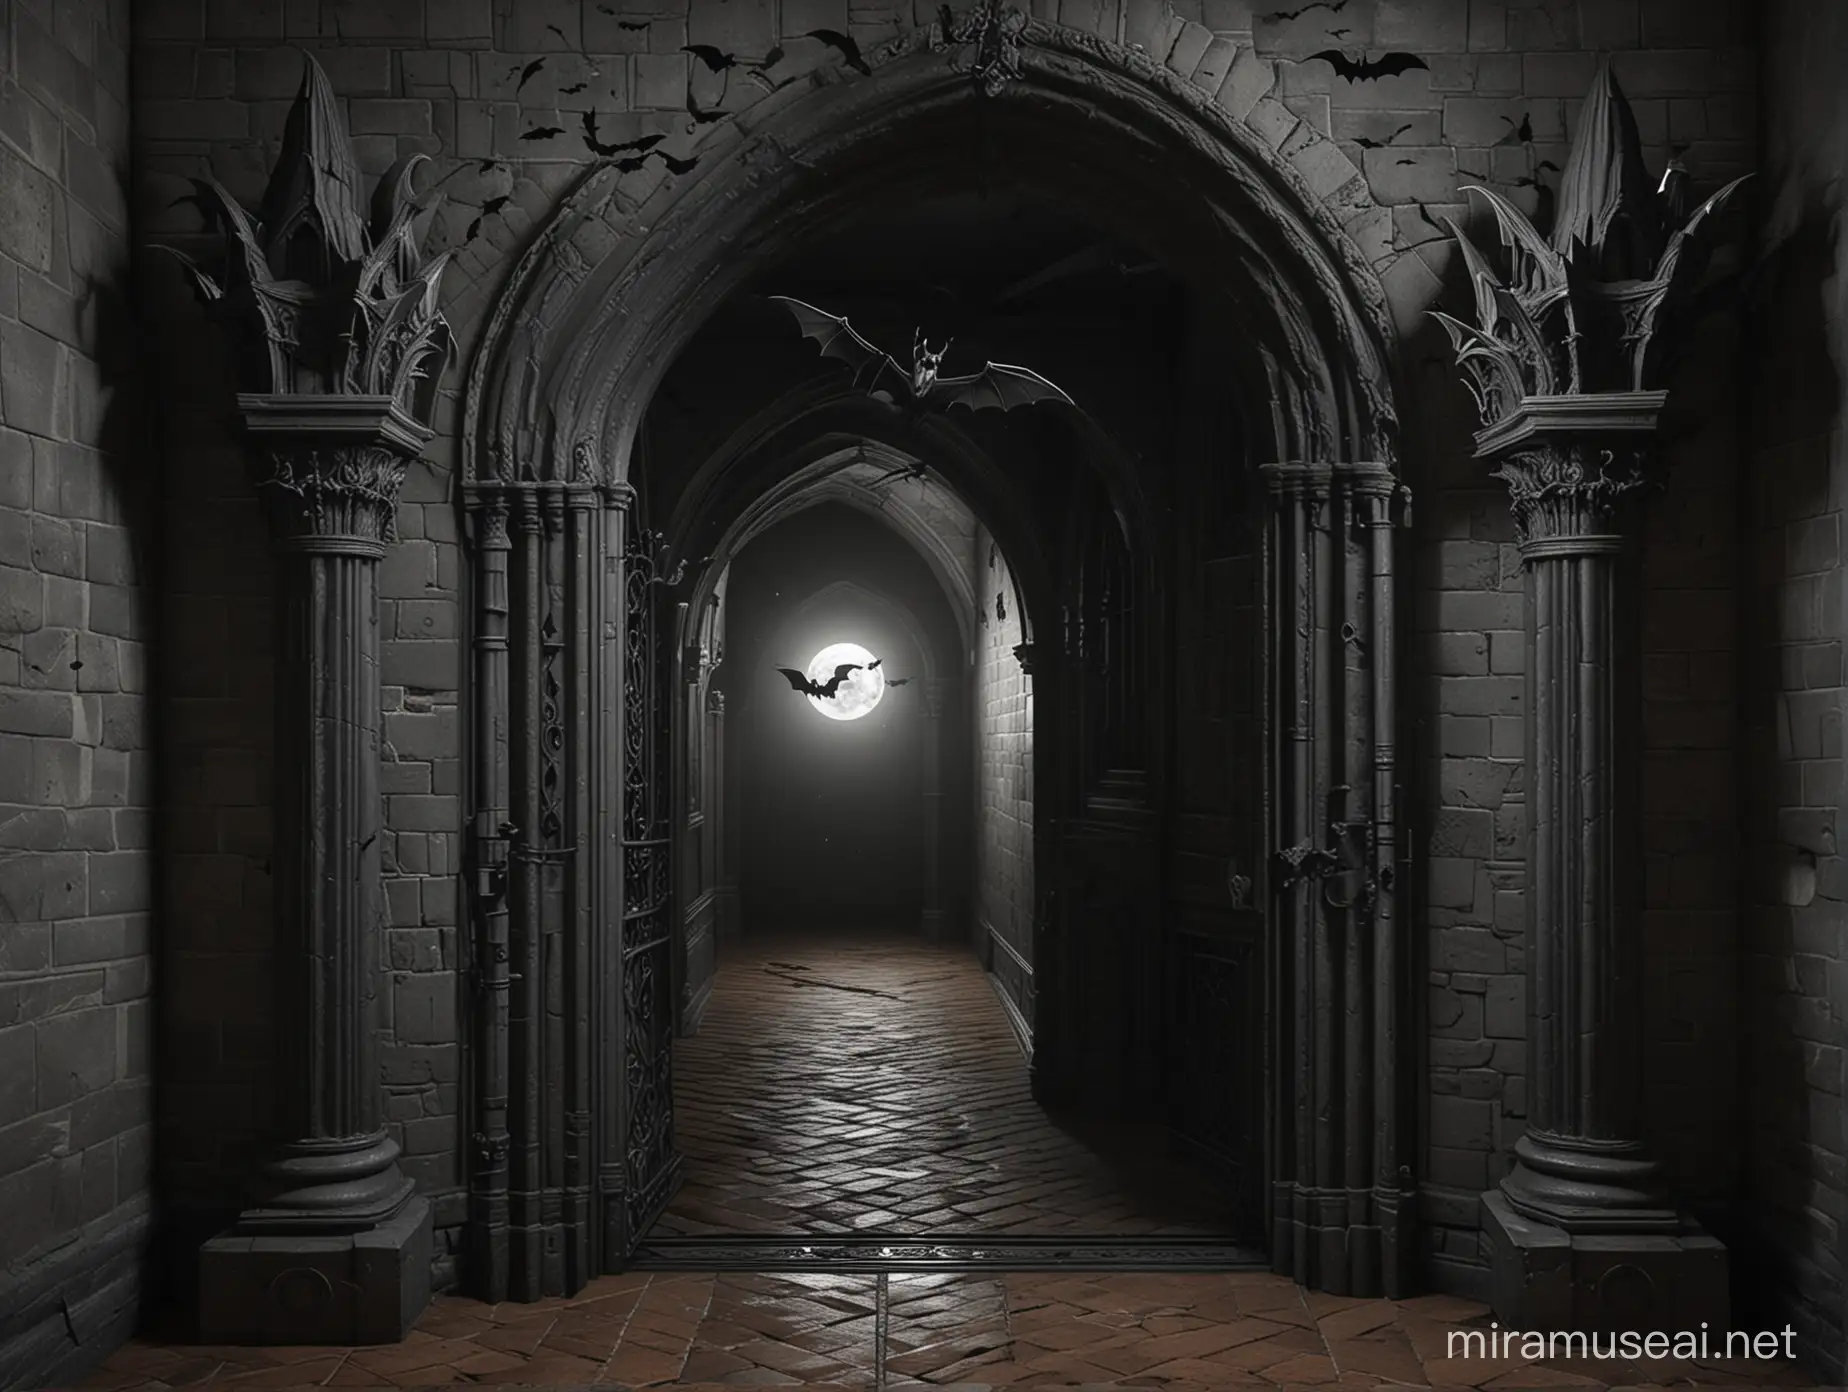 Create a scenery of an endless doorway in a highy decorated goth style castle. At night time with bats.




